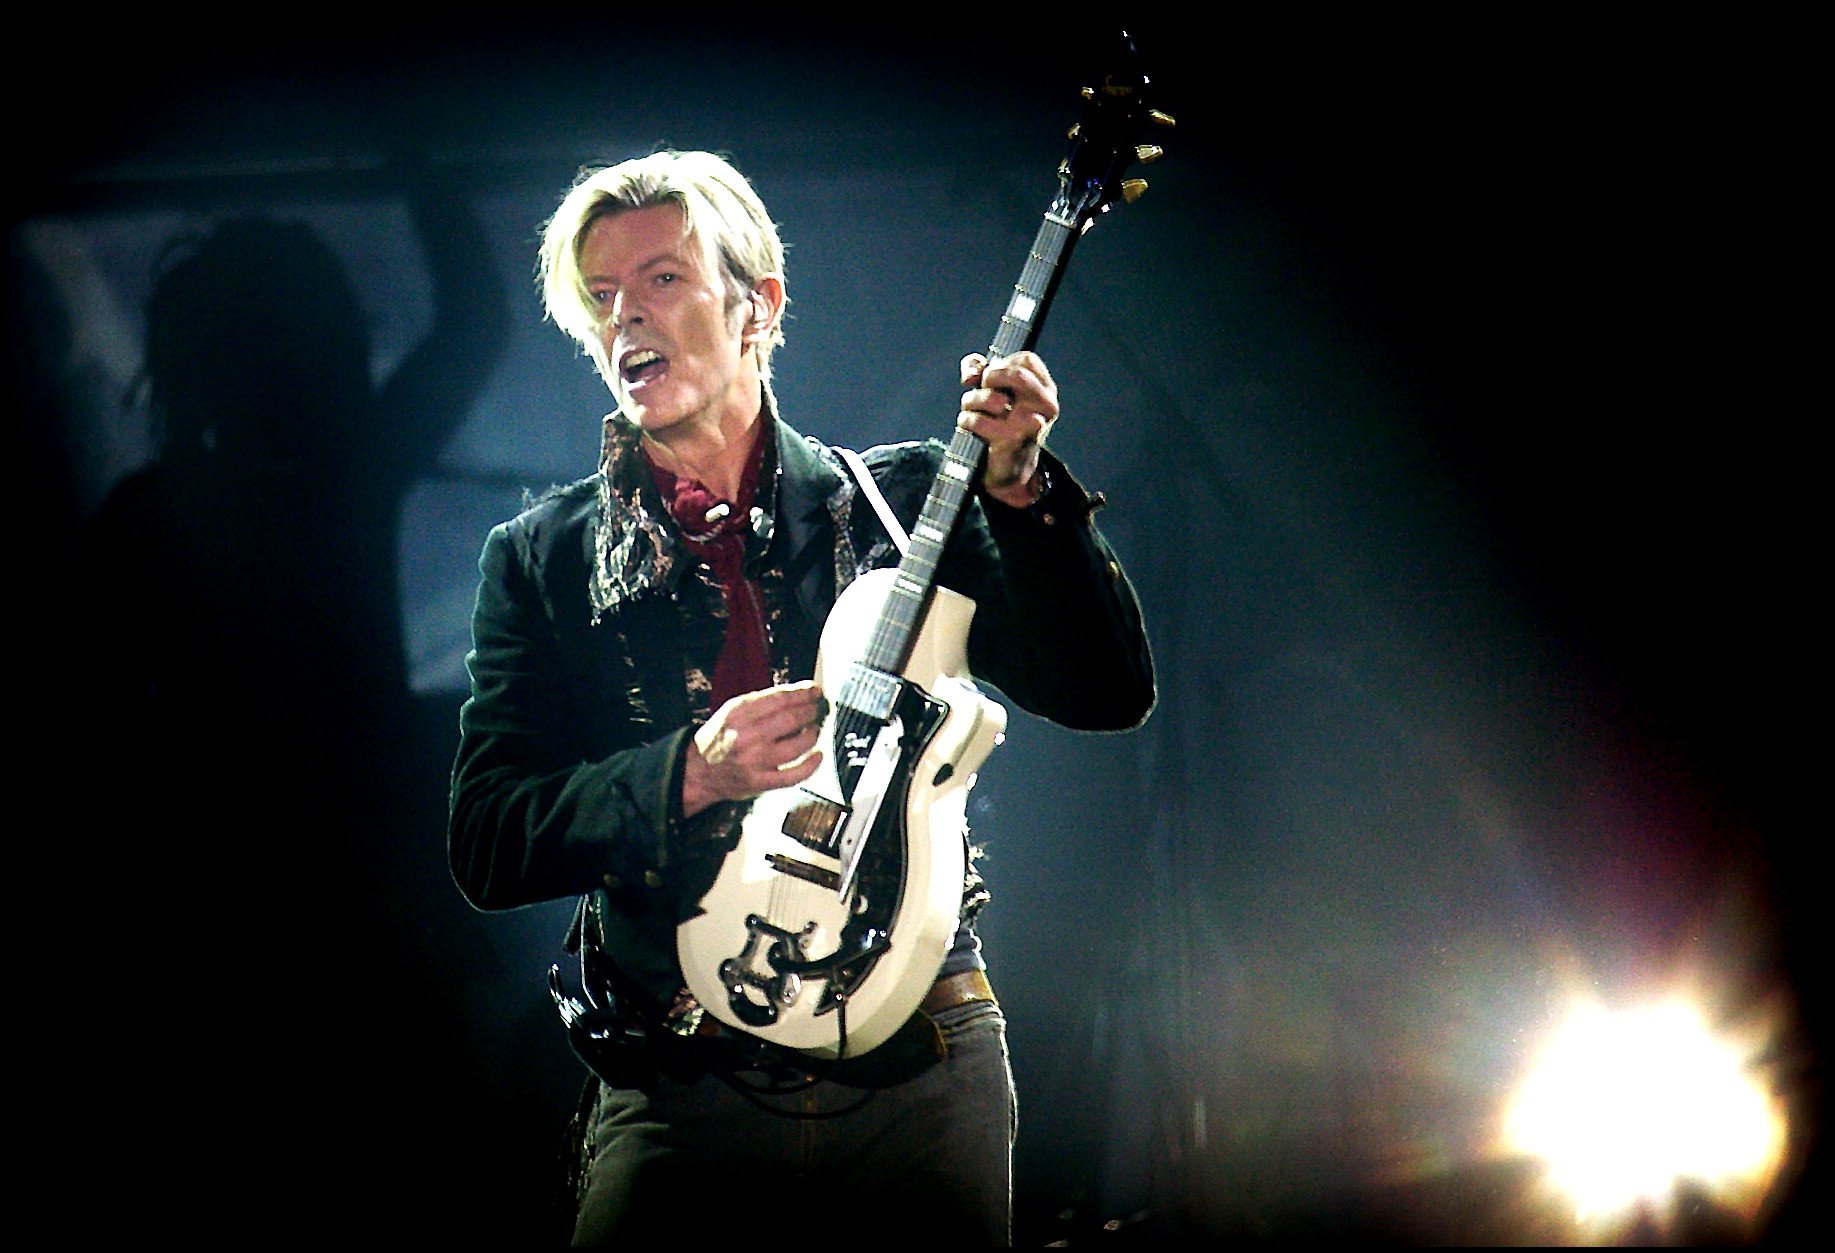 David Bowie performs on stage as at the Forum in Copenhagen in 2003